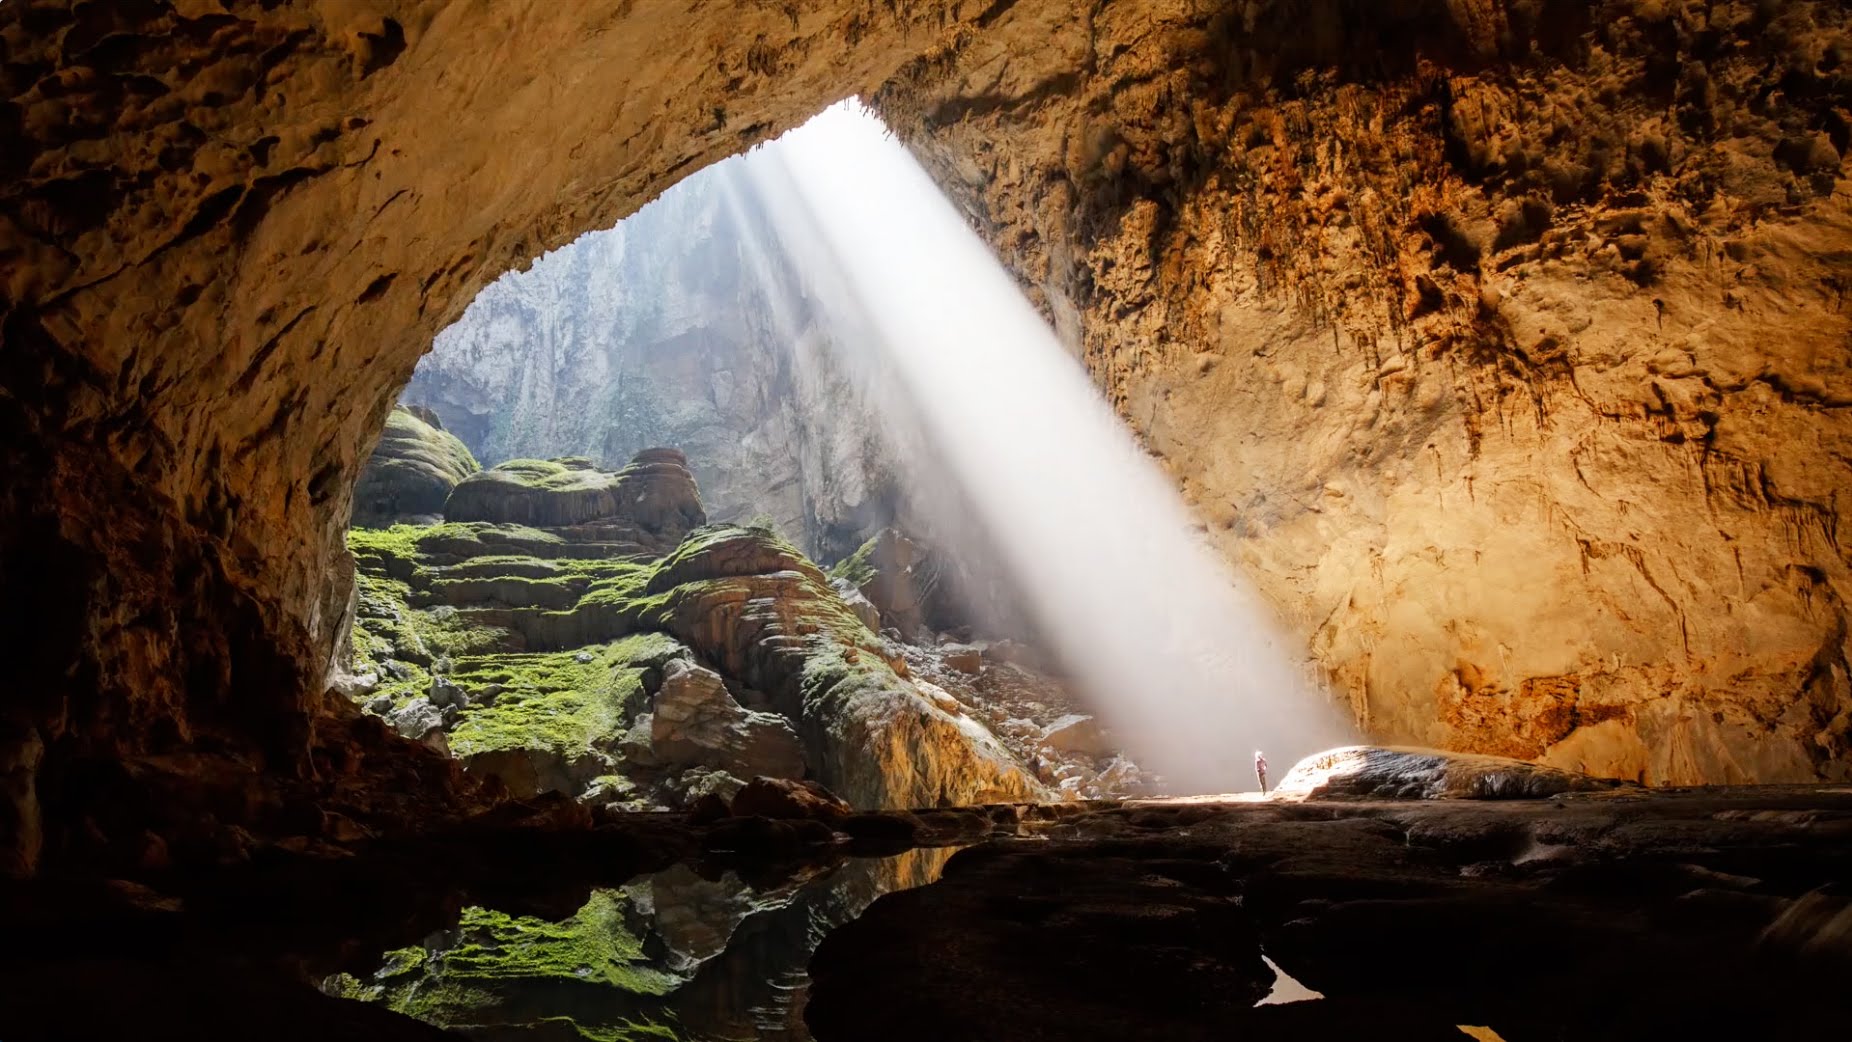 The beauty of Son Doong cave